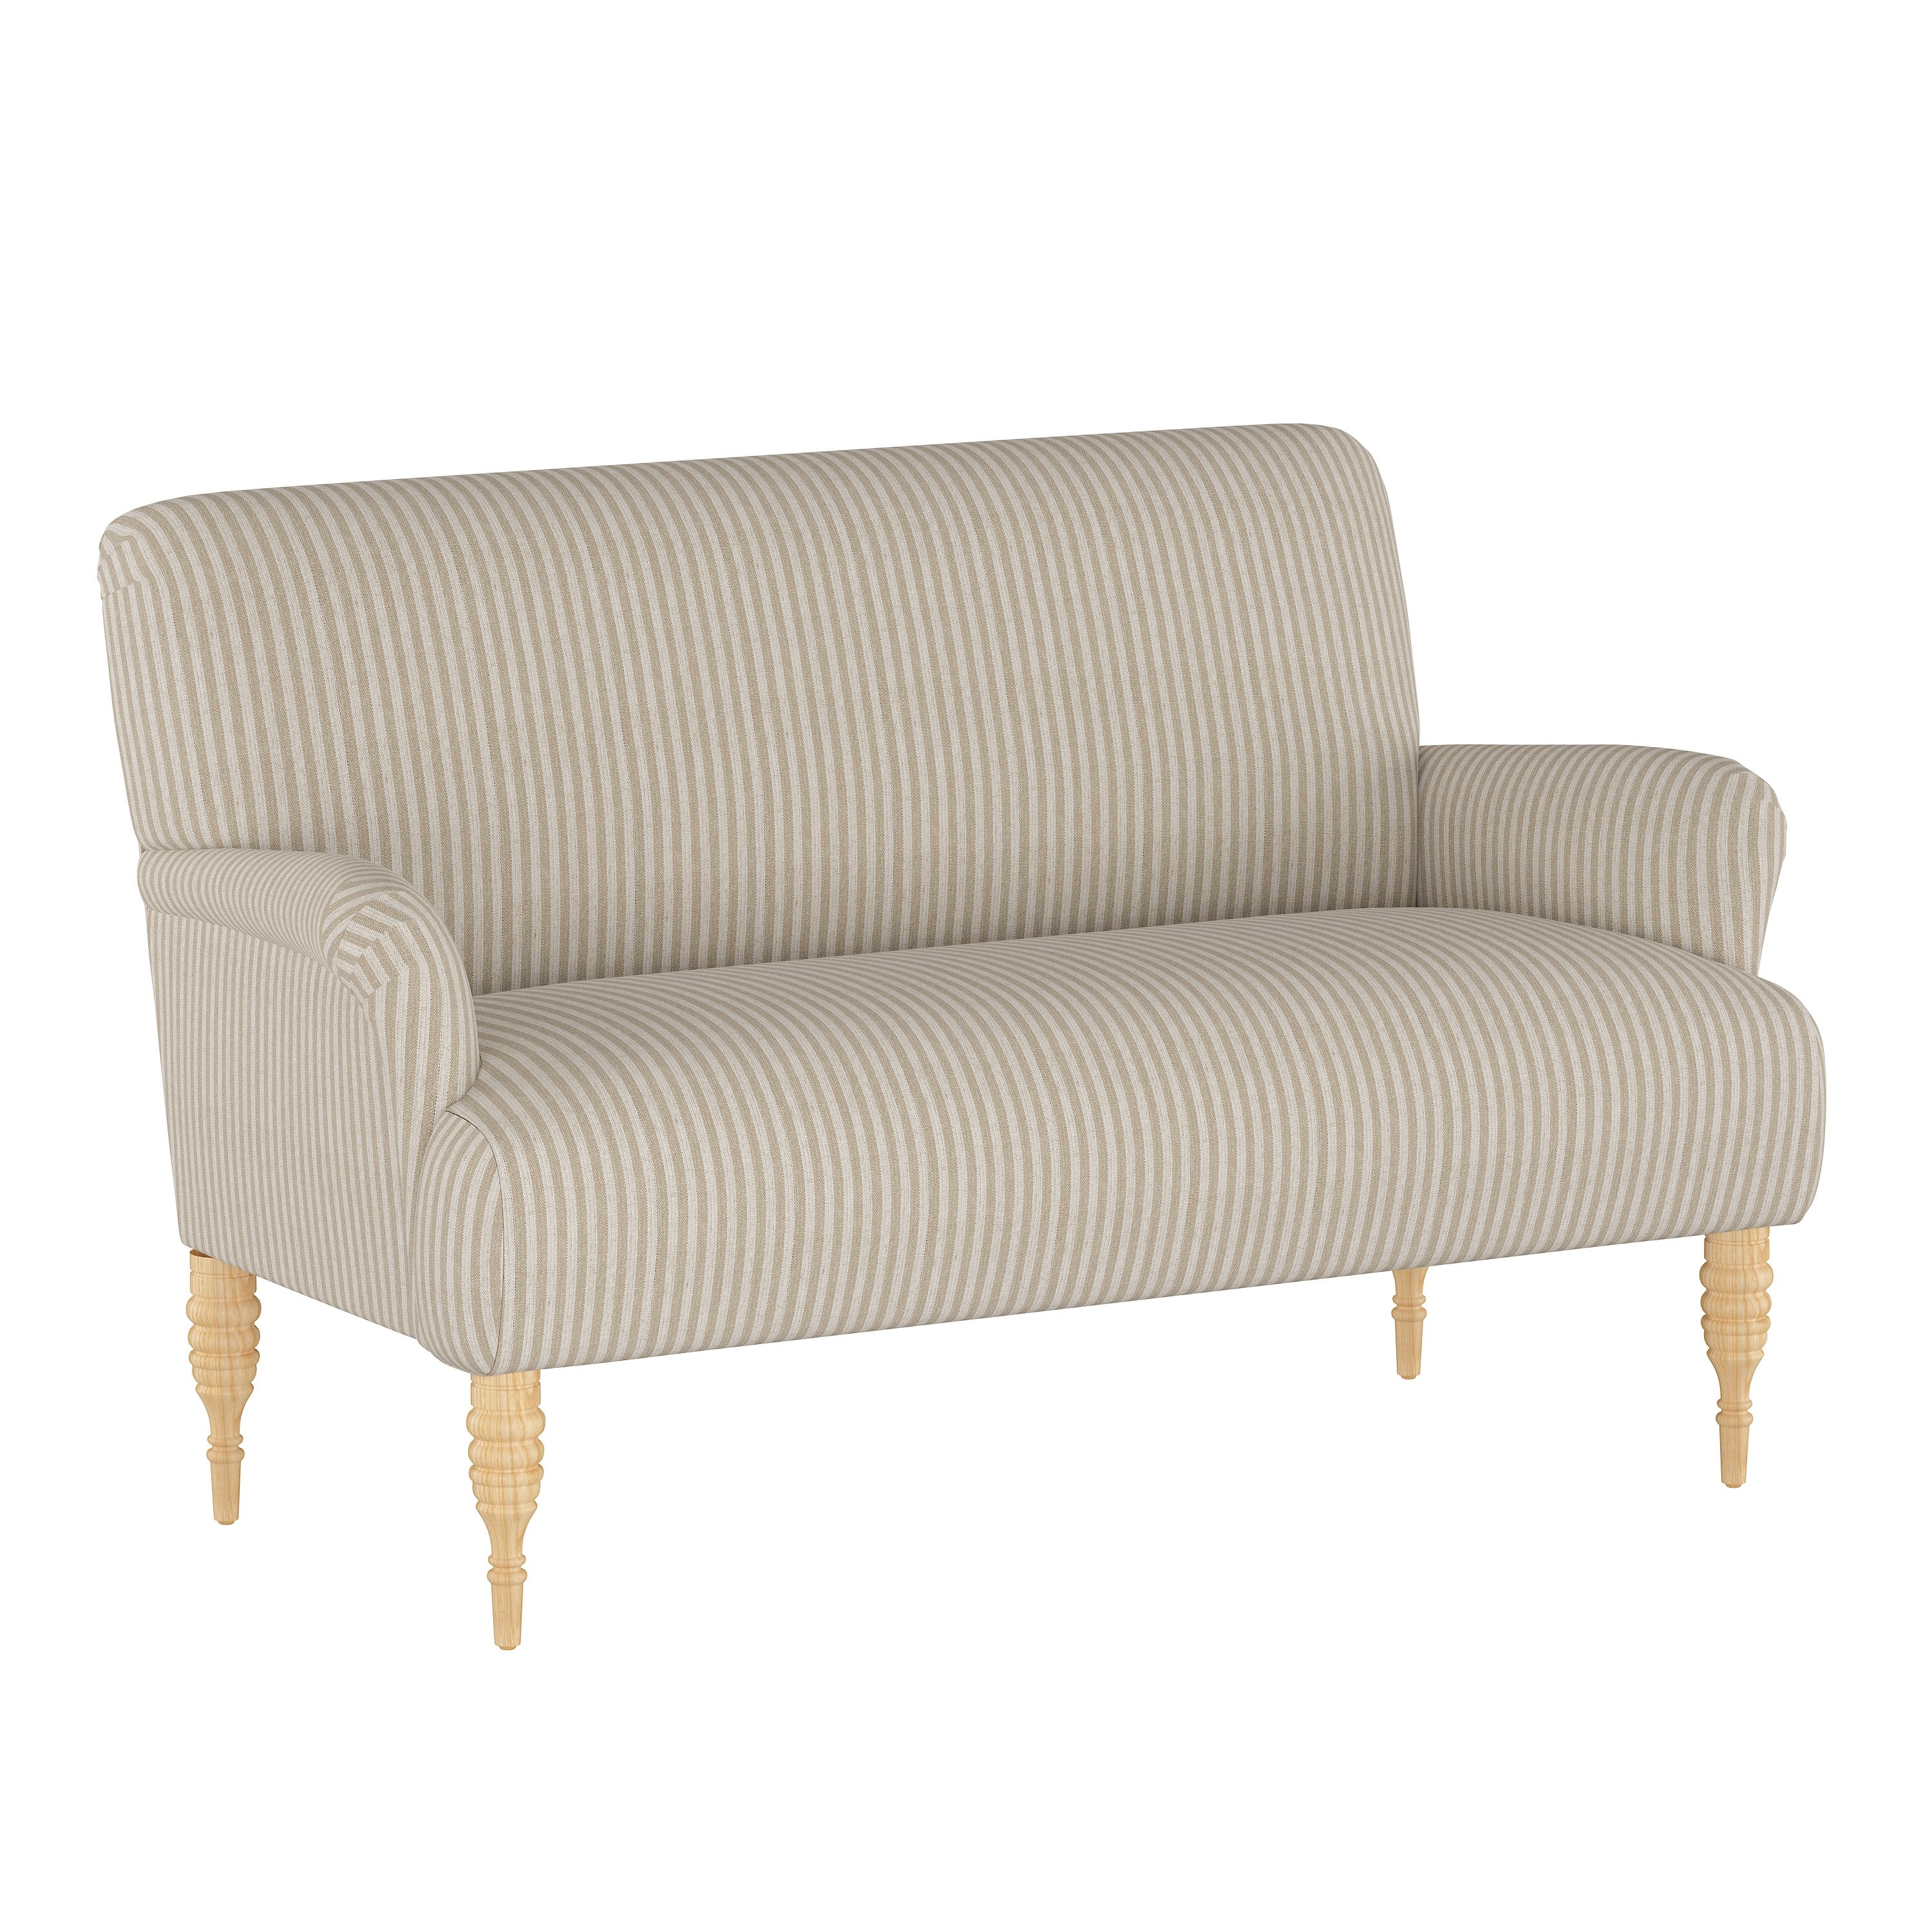 Nicola Settee in Scout Stripe Taupe - Image 0